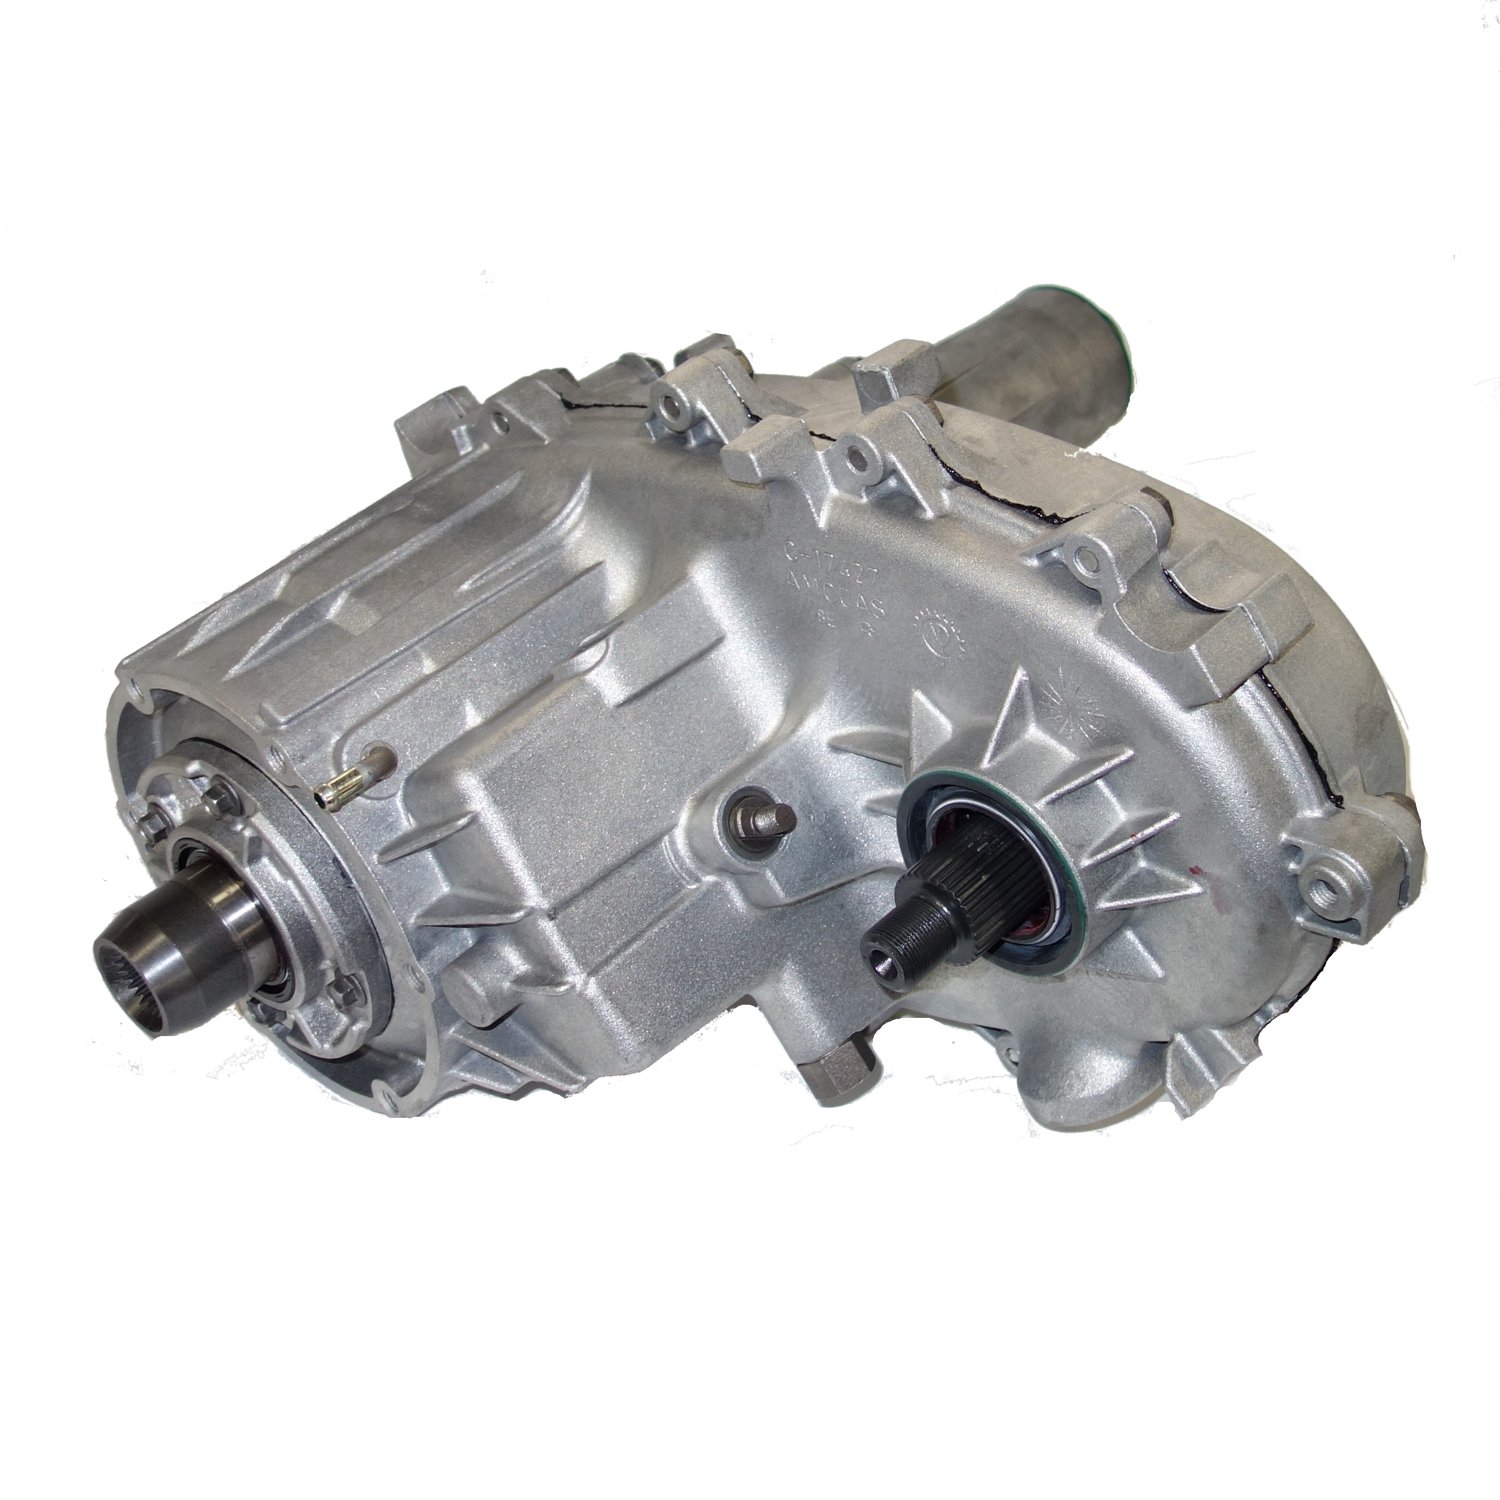 Remanufactured NP241 Transfer Case for GM 93-94 1500